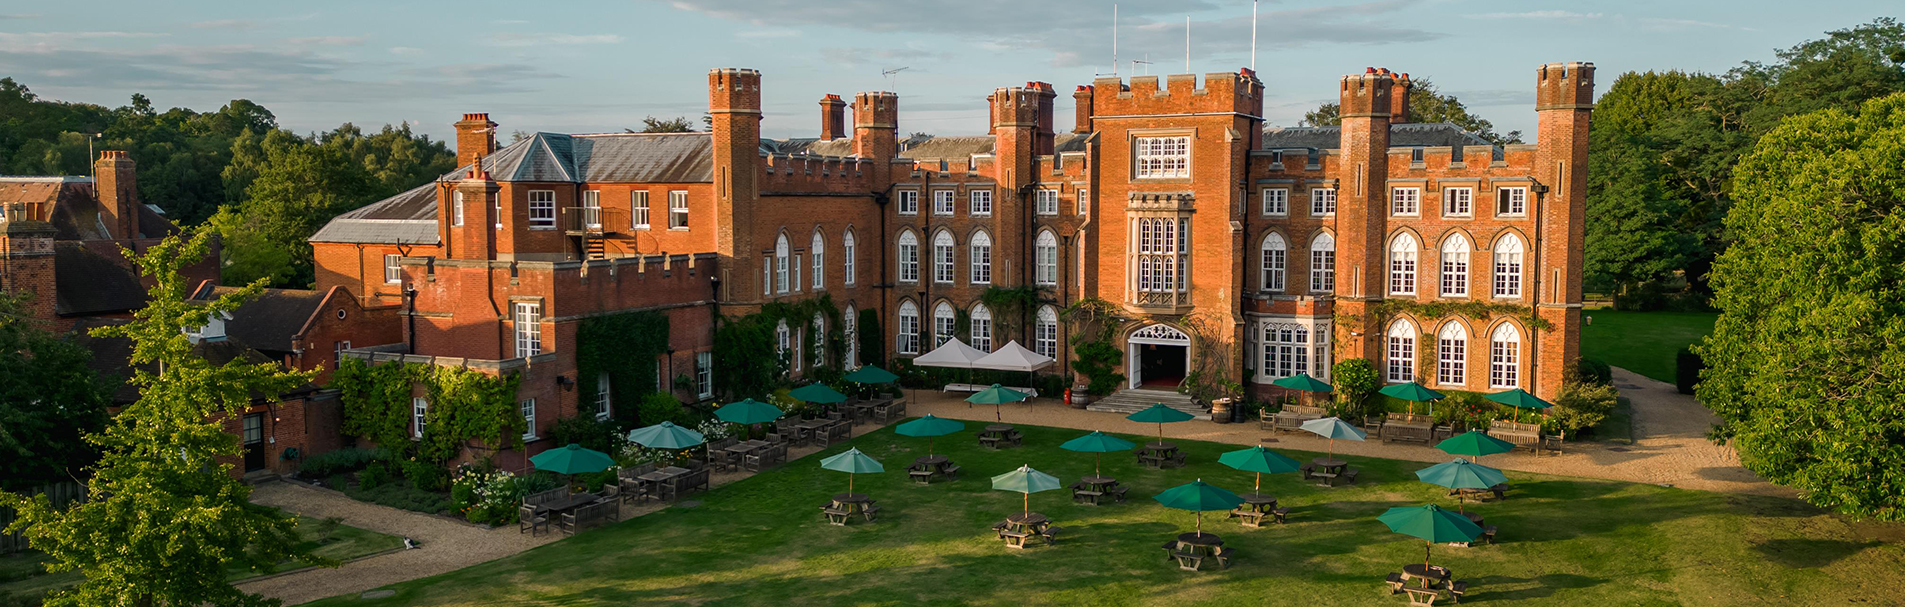 Aerial view of Cumberland Lodge, Windsor Great Park.